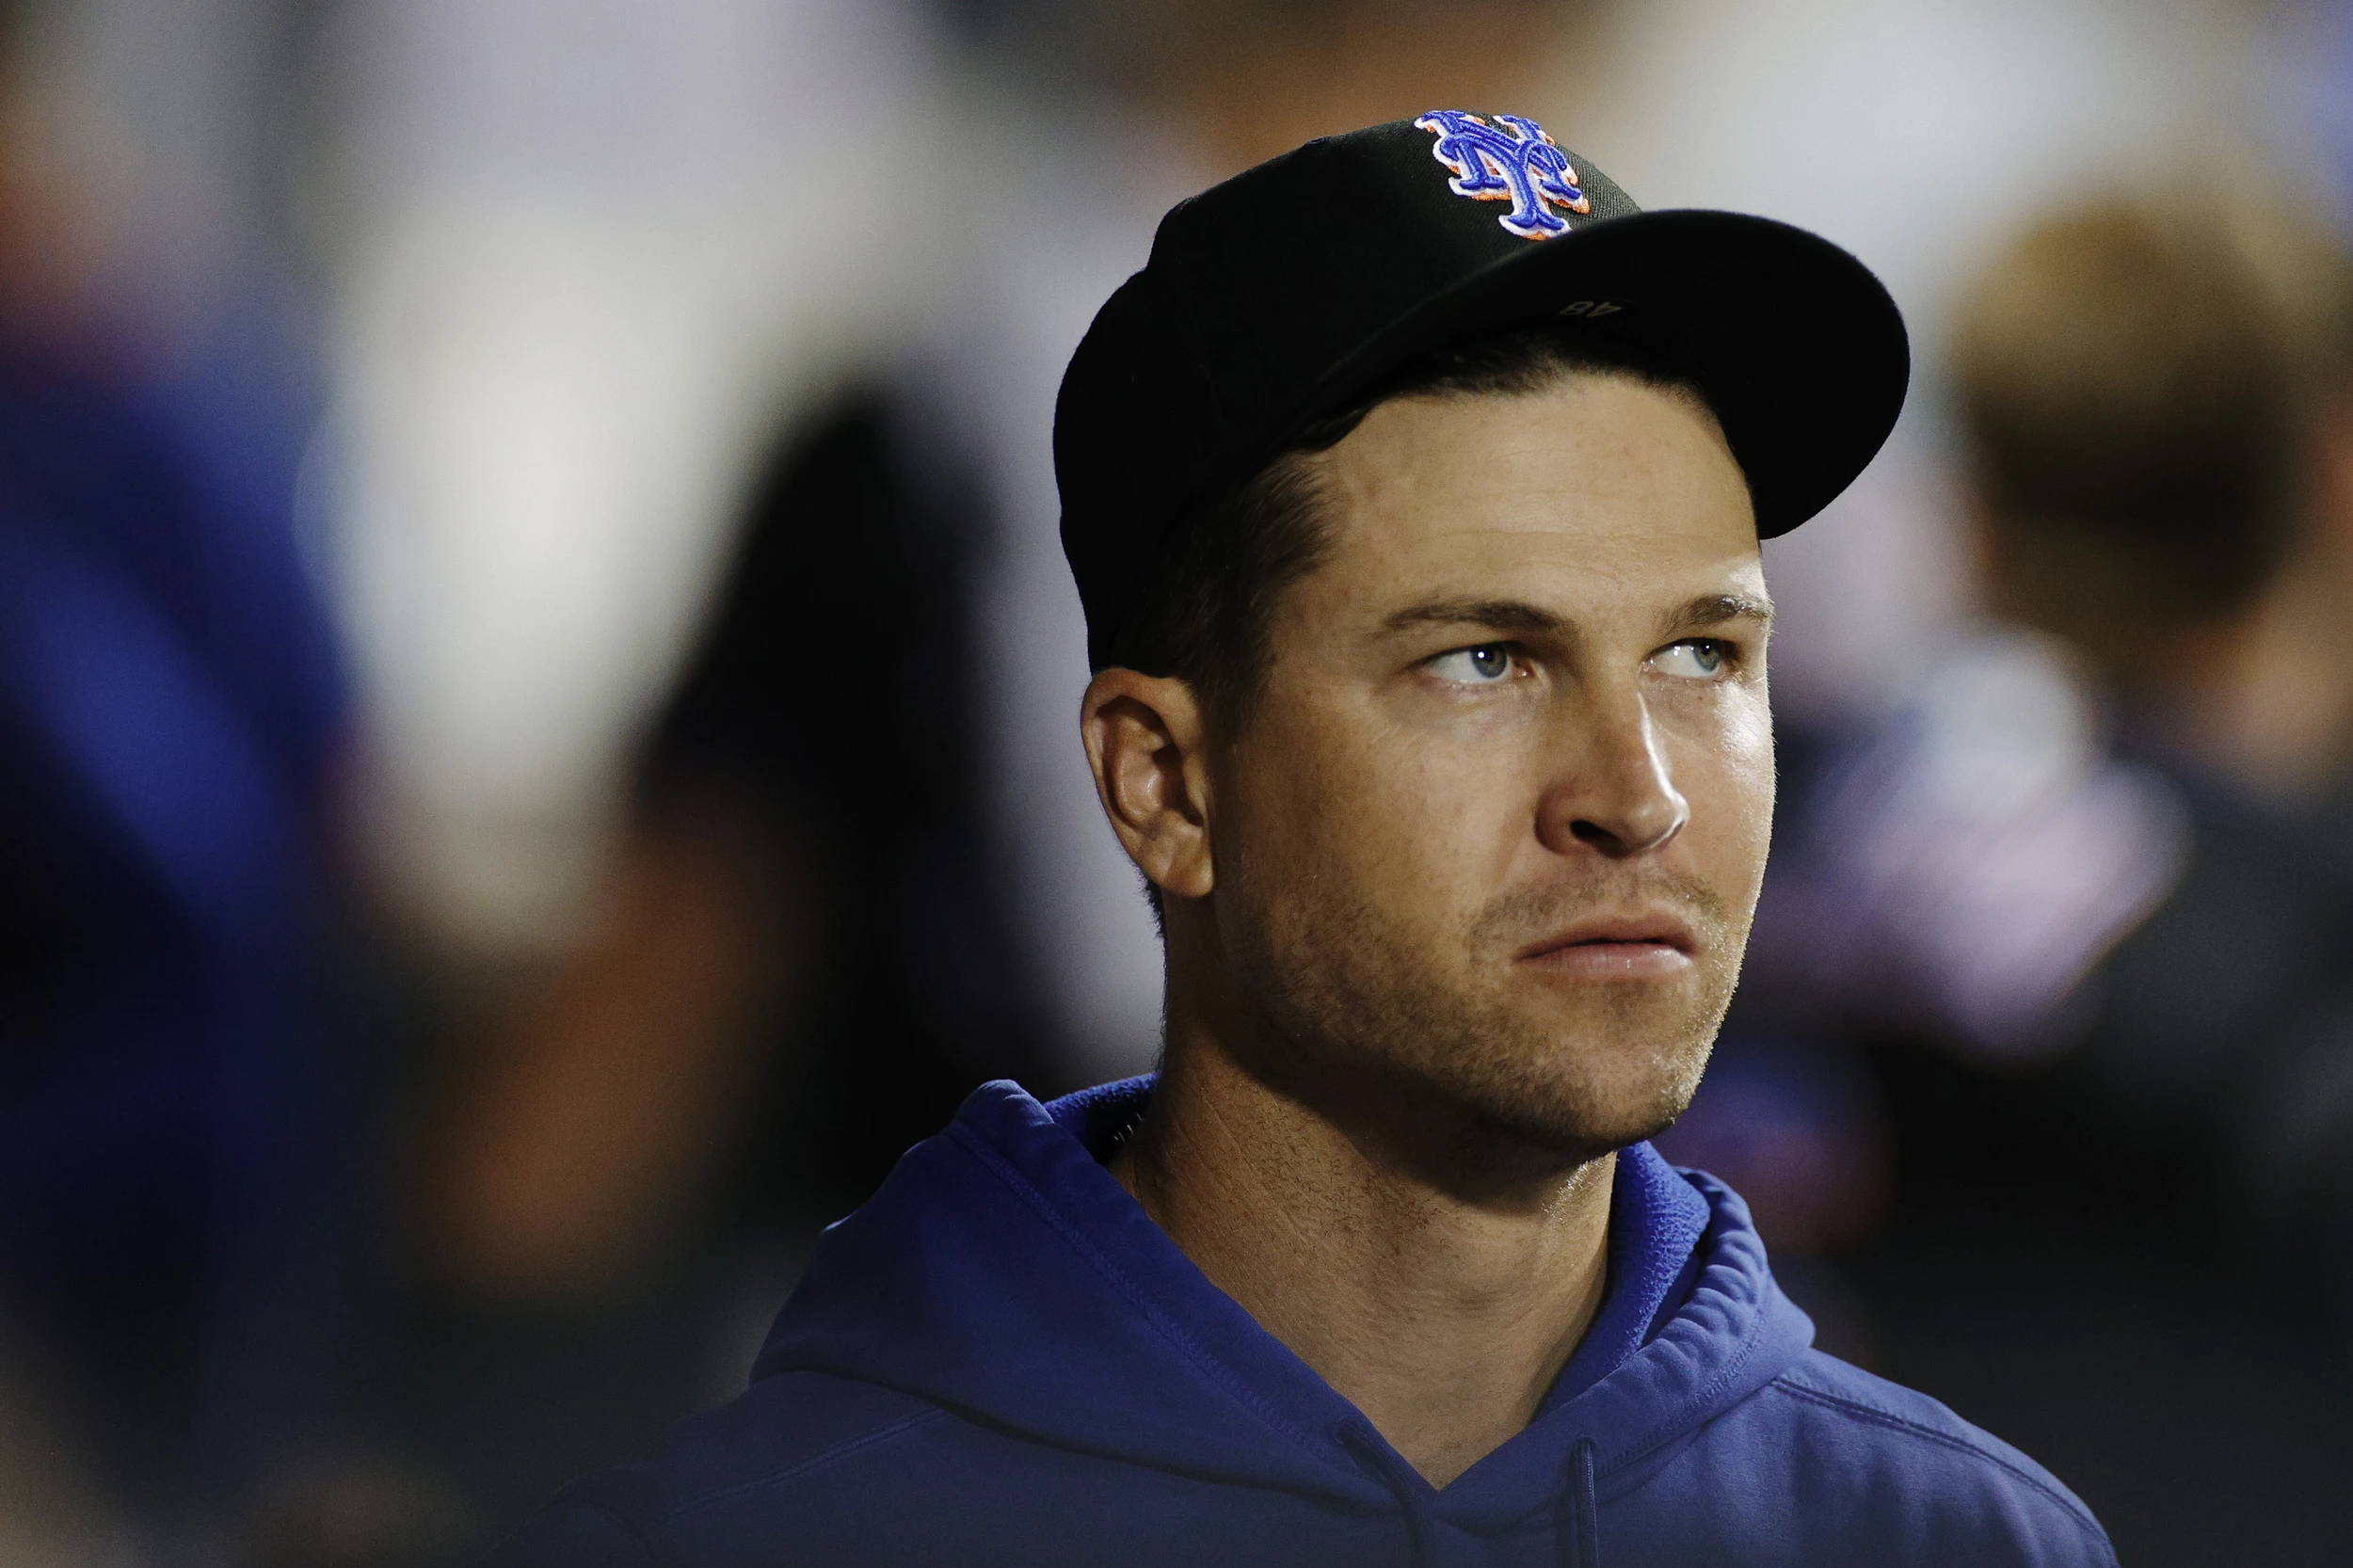 This Week in Mets: No, really, can Jacob deGrom challenge Bob